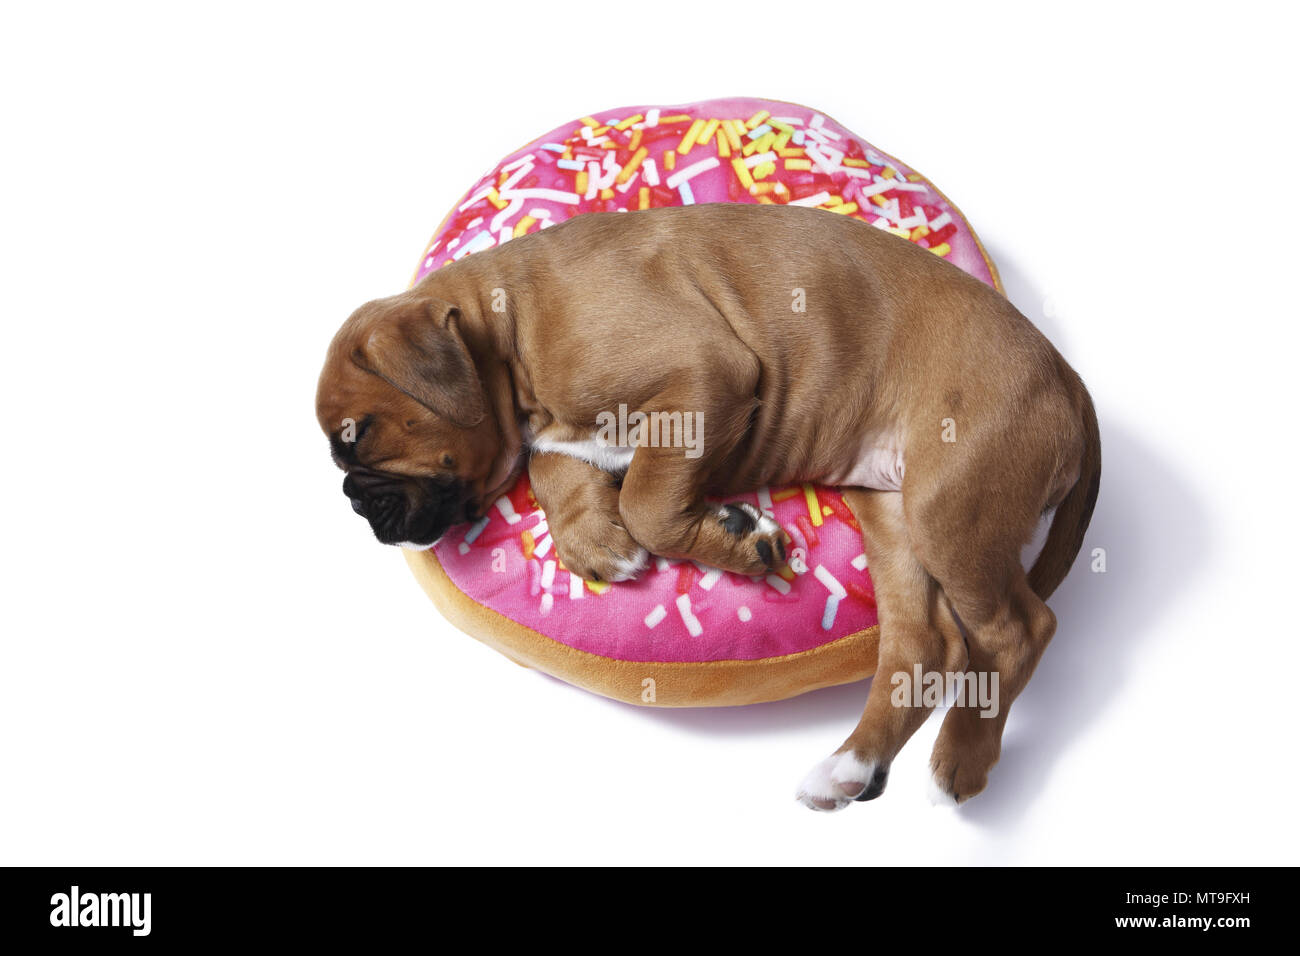 German Boxer. Puppy (7 weeks old) sleeping on a donut-shaped cushion. Studio picture Stock Photo